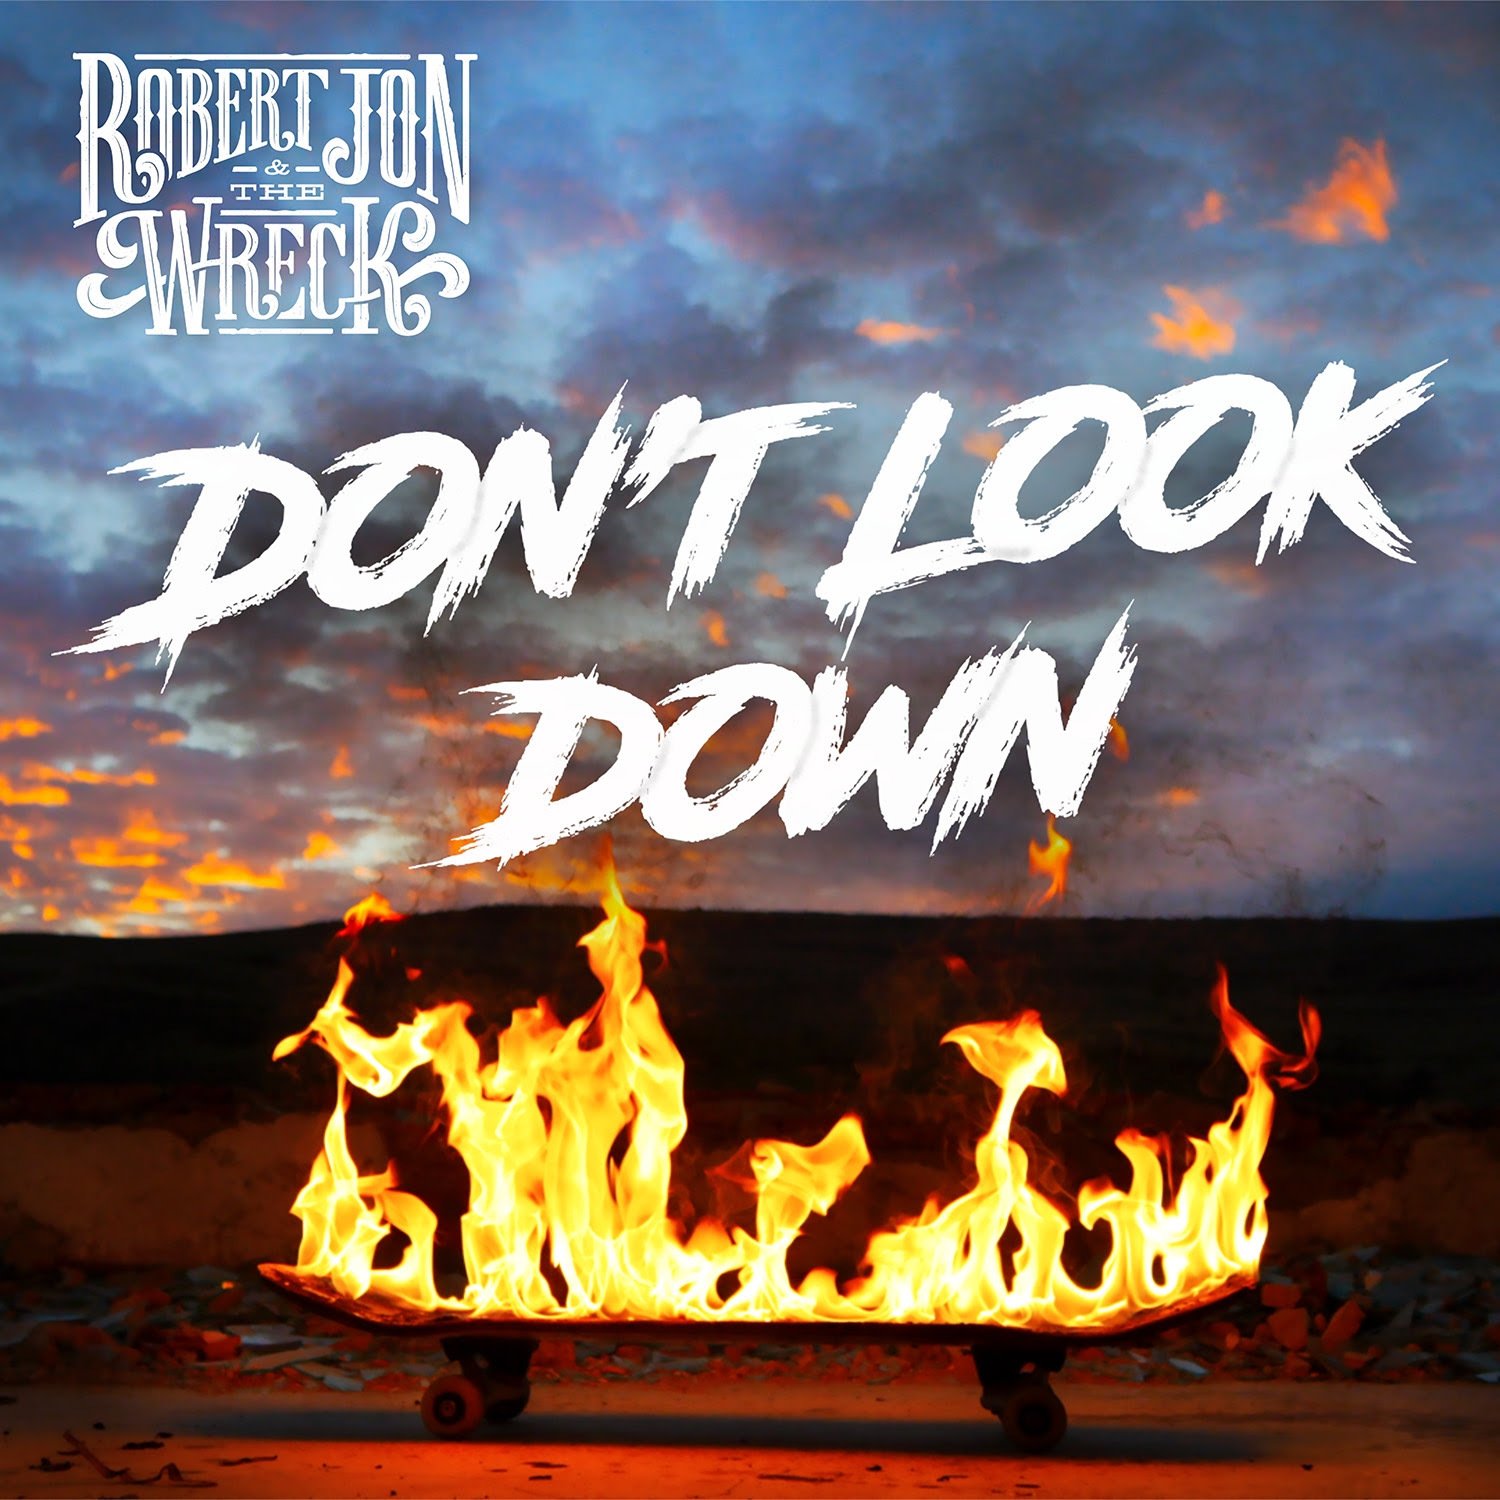 Robert Jon & The Wreck Encourage Fans To Keep Their Head Up On
Energetic New Single, “Don’t Look Down”